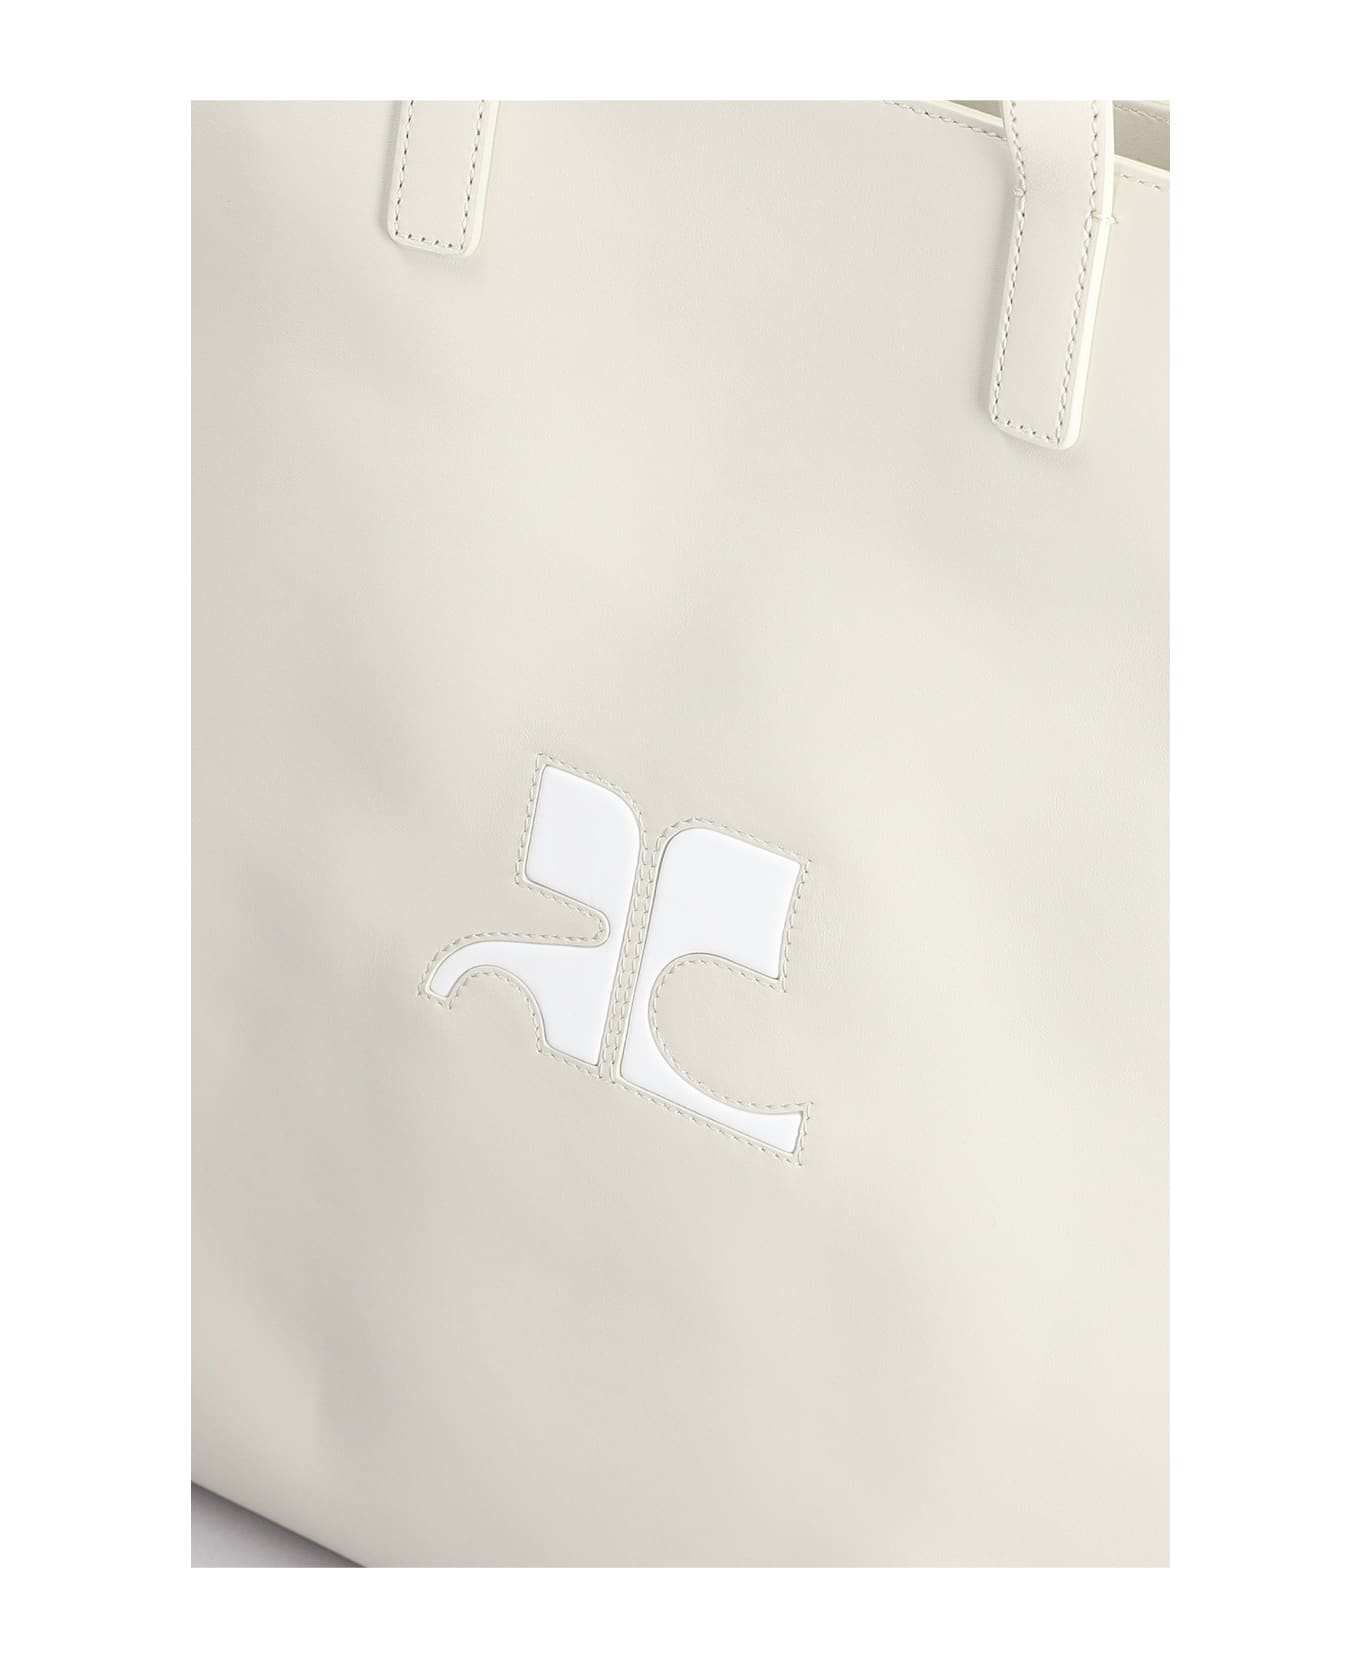 Courrèges Tote In Beige Leather - beige トートバッグ